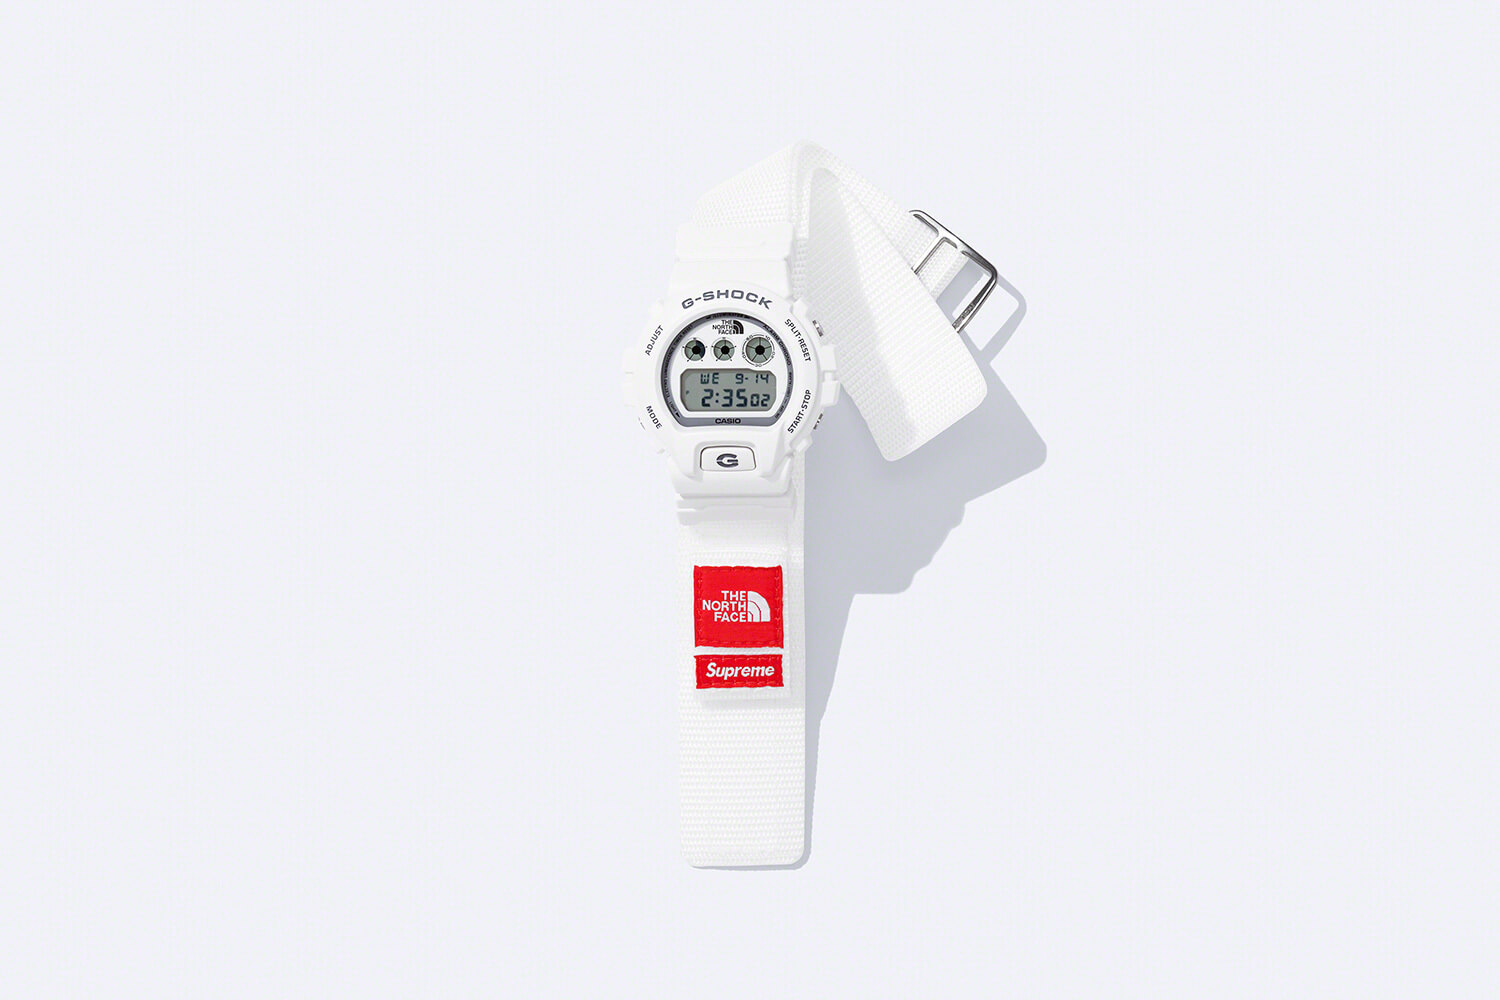 The Supreme x The North Face x G-Shock DW-6900 collaboration is ...